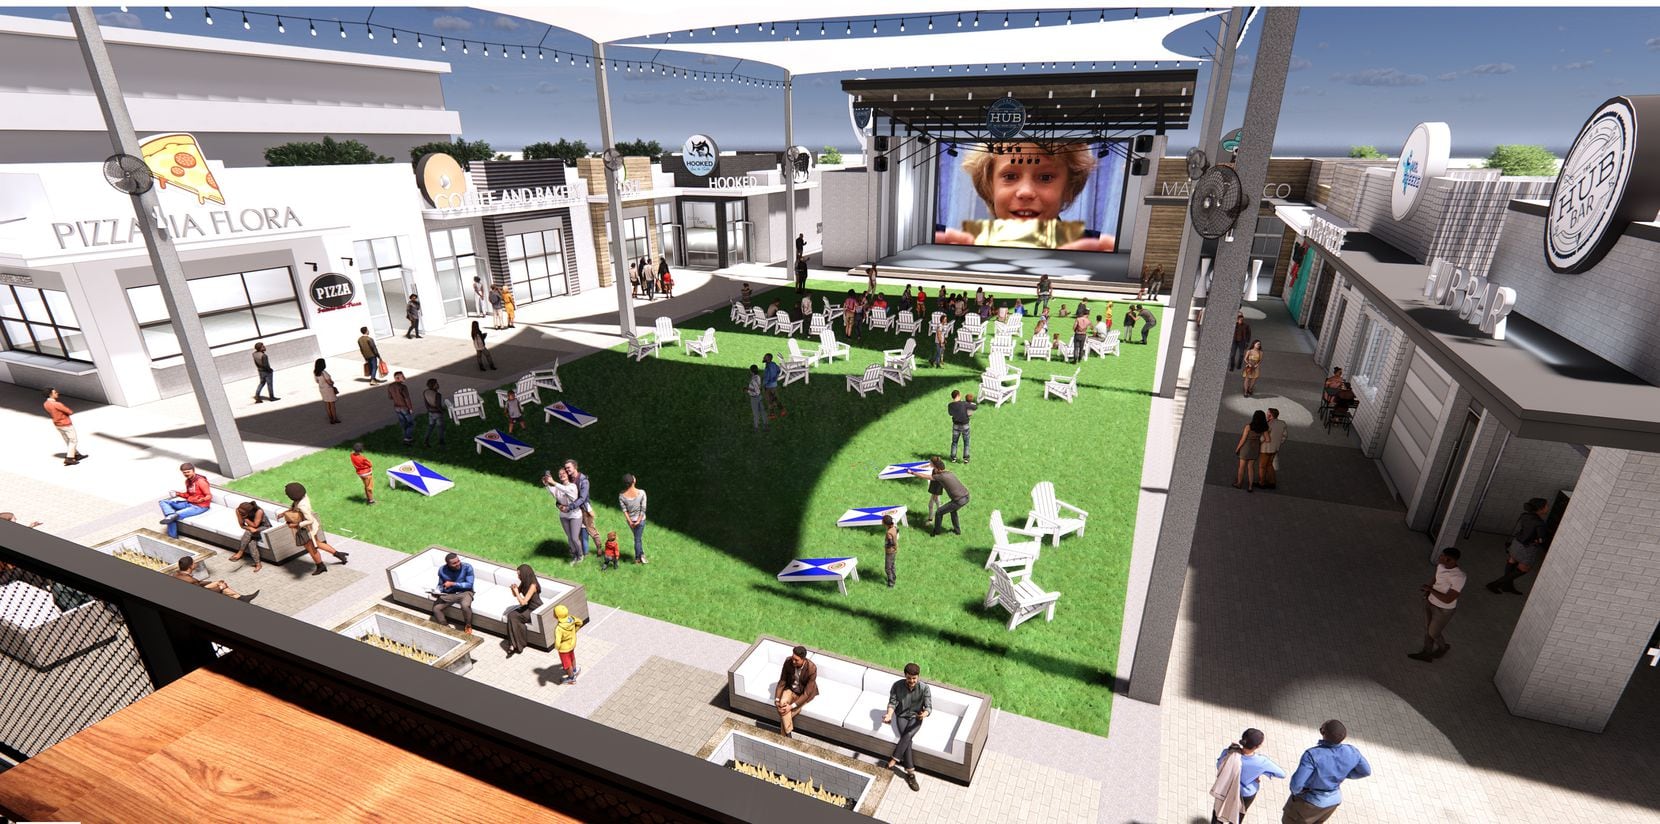 Restaurants at The Hub will surround a large open-air event space.